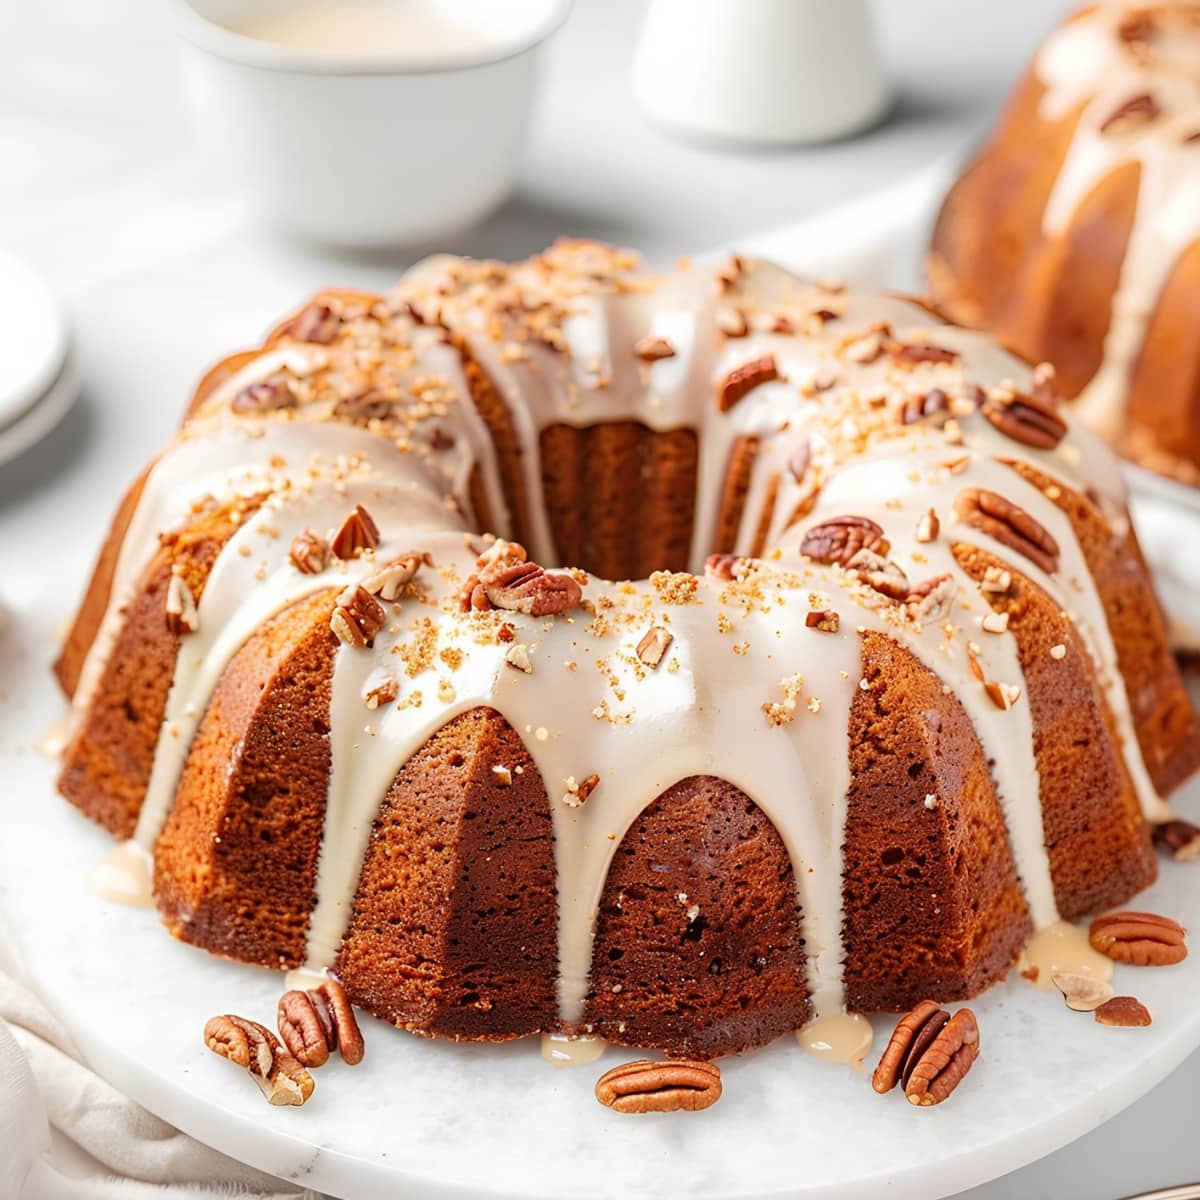 Pound cake with pecan nuts, drizzled with glaze